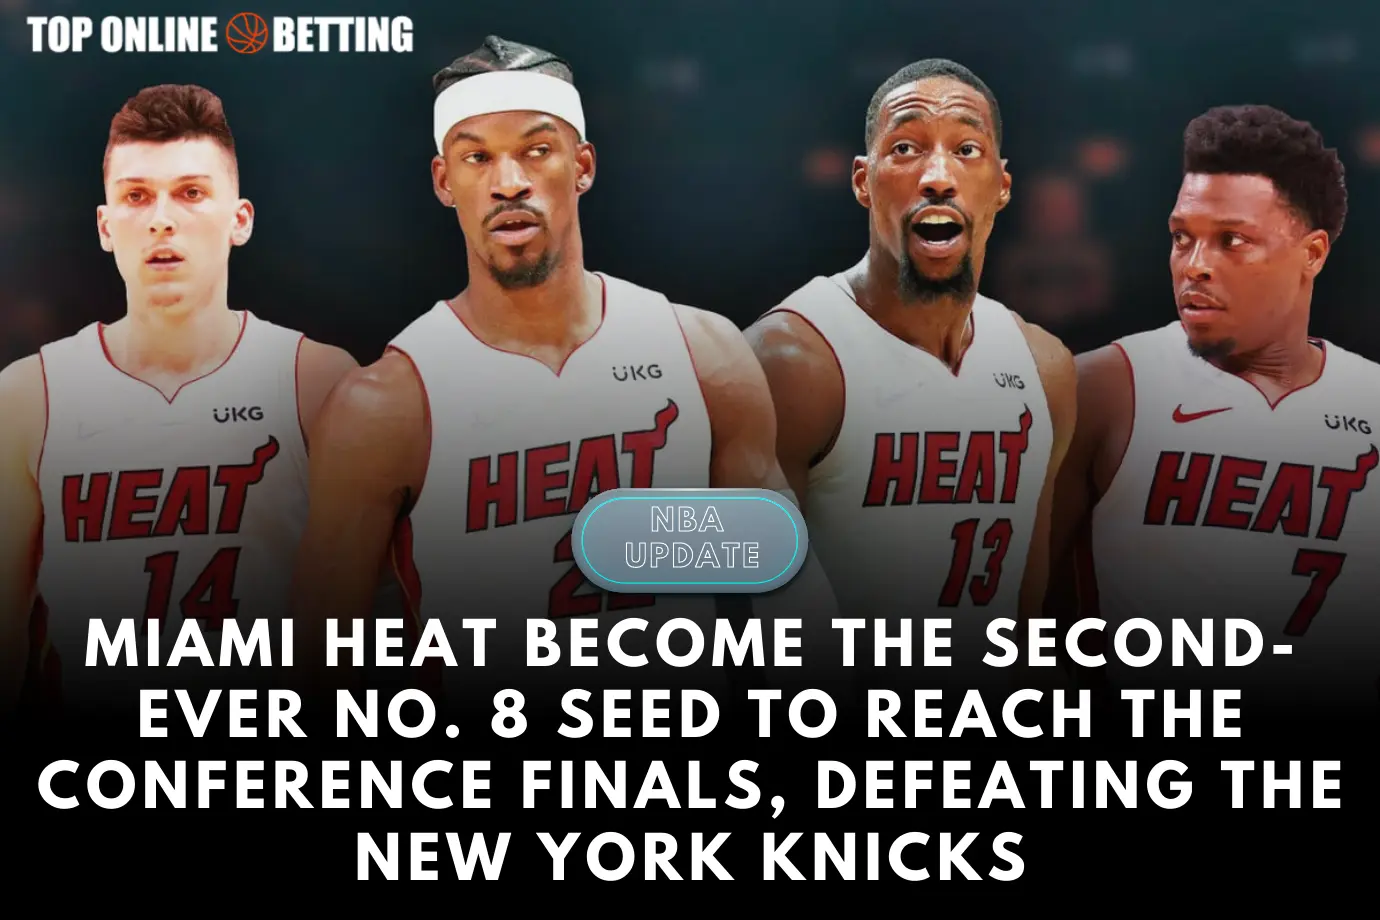 Miami Heat Become the Second-Ever No. 8 Seed to Reach the Conference Finals, Defeating the New York Knicks